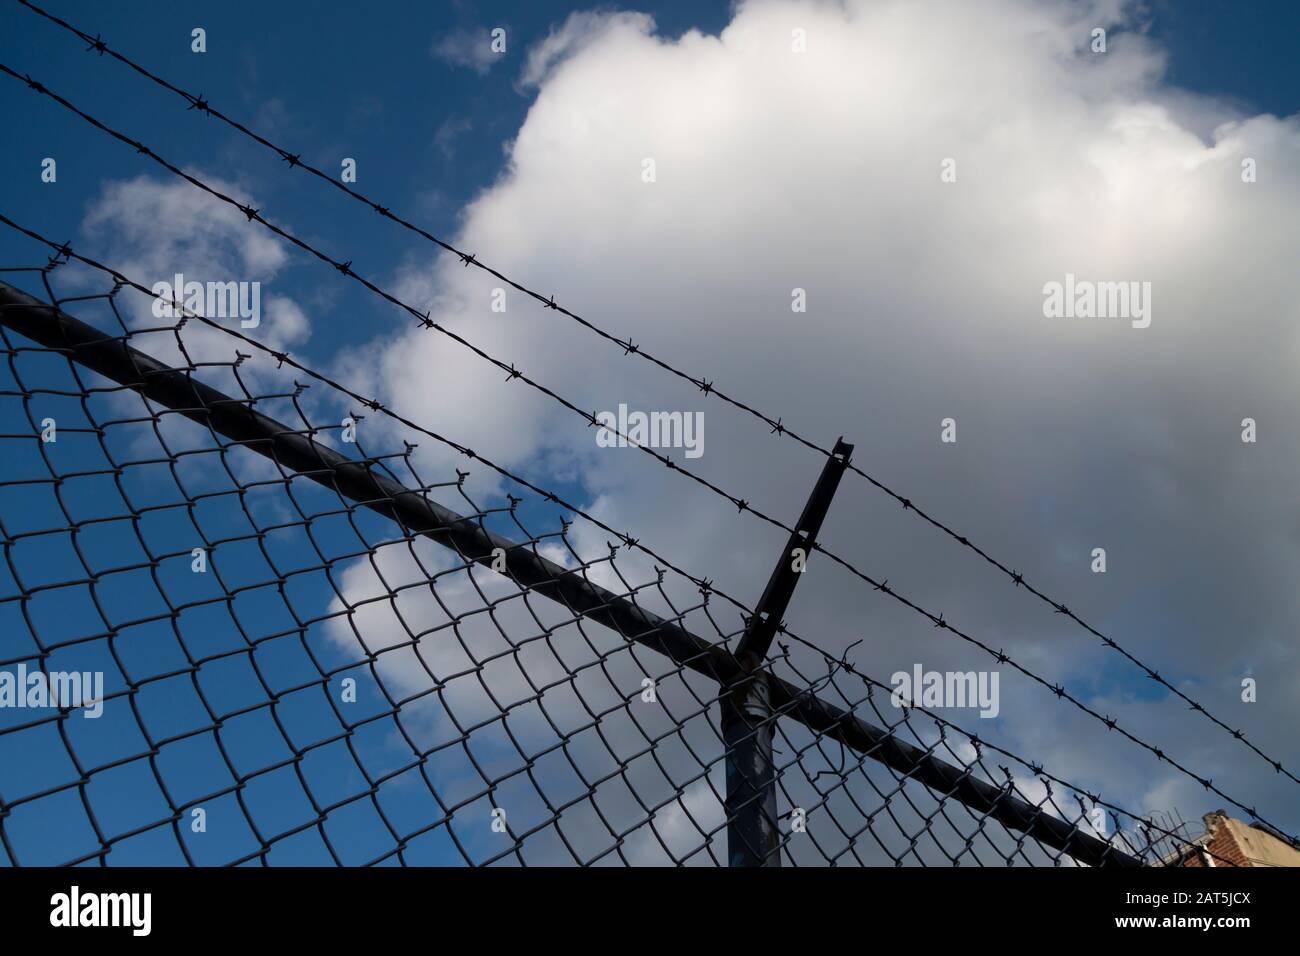 blocked off area with barbed wire fence Stock Photo